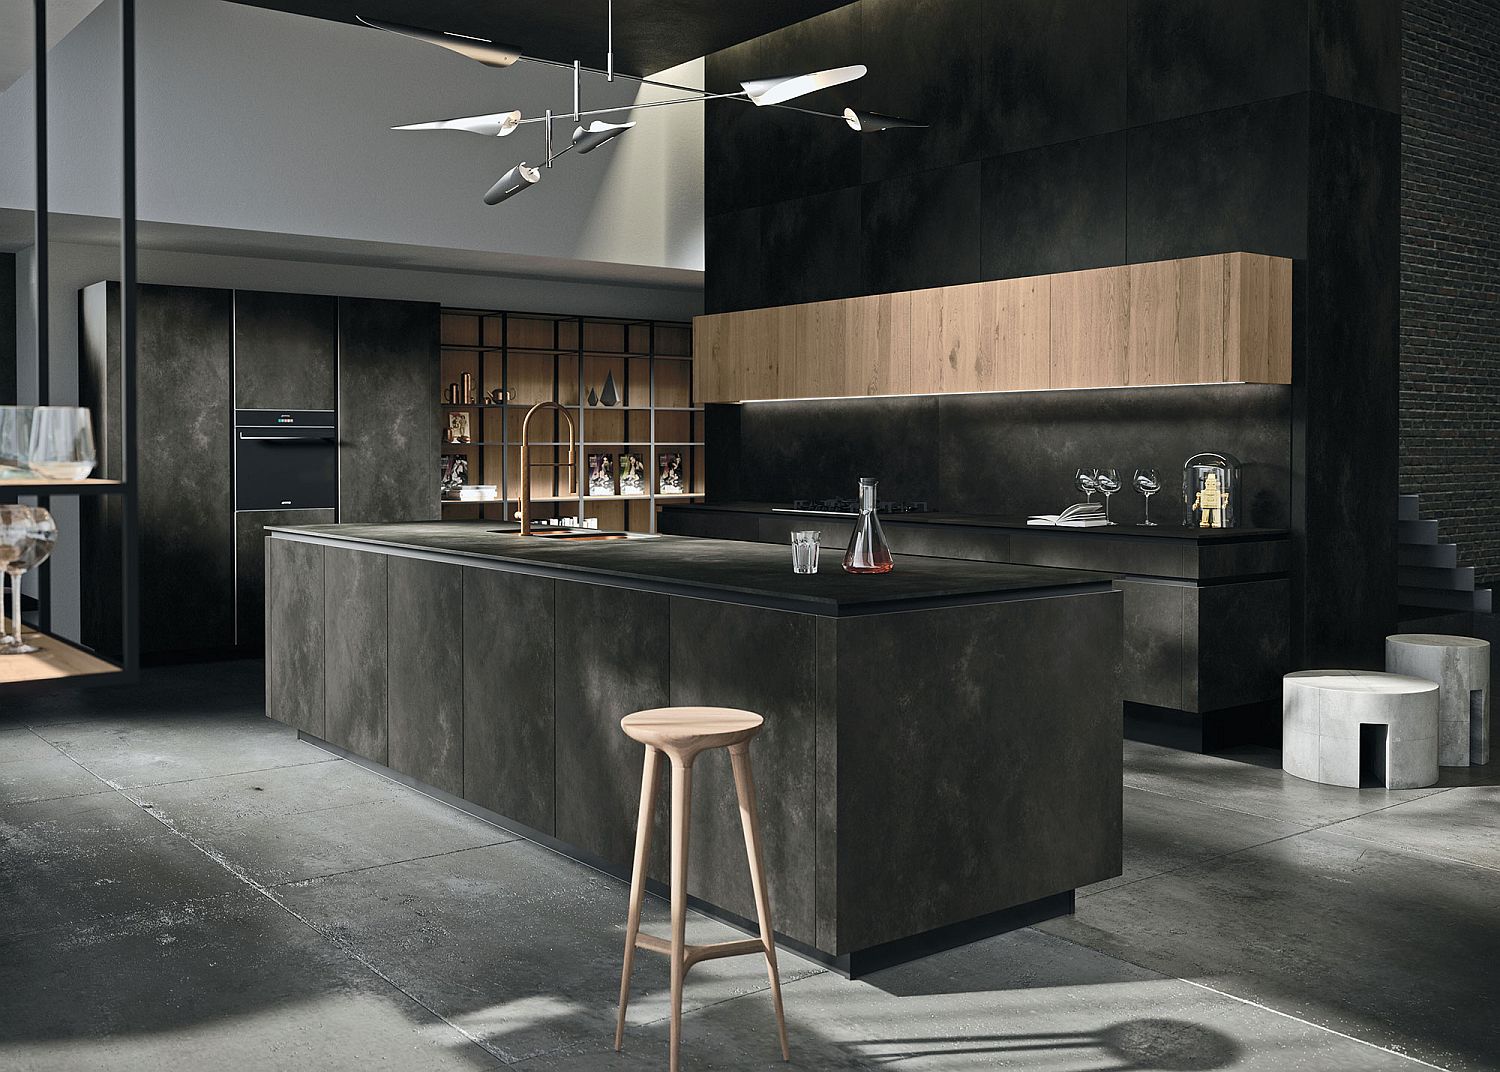 Turn to darker hues for a more dramatic kitchen accented with a simple wood stool